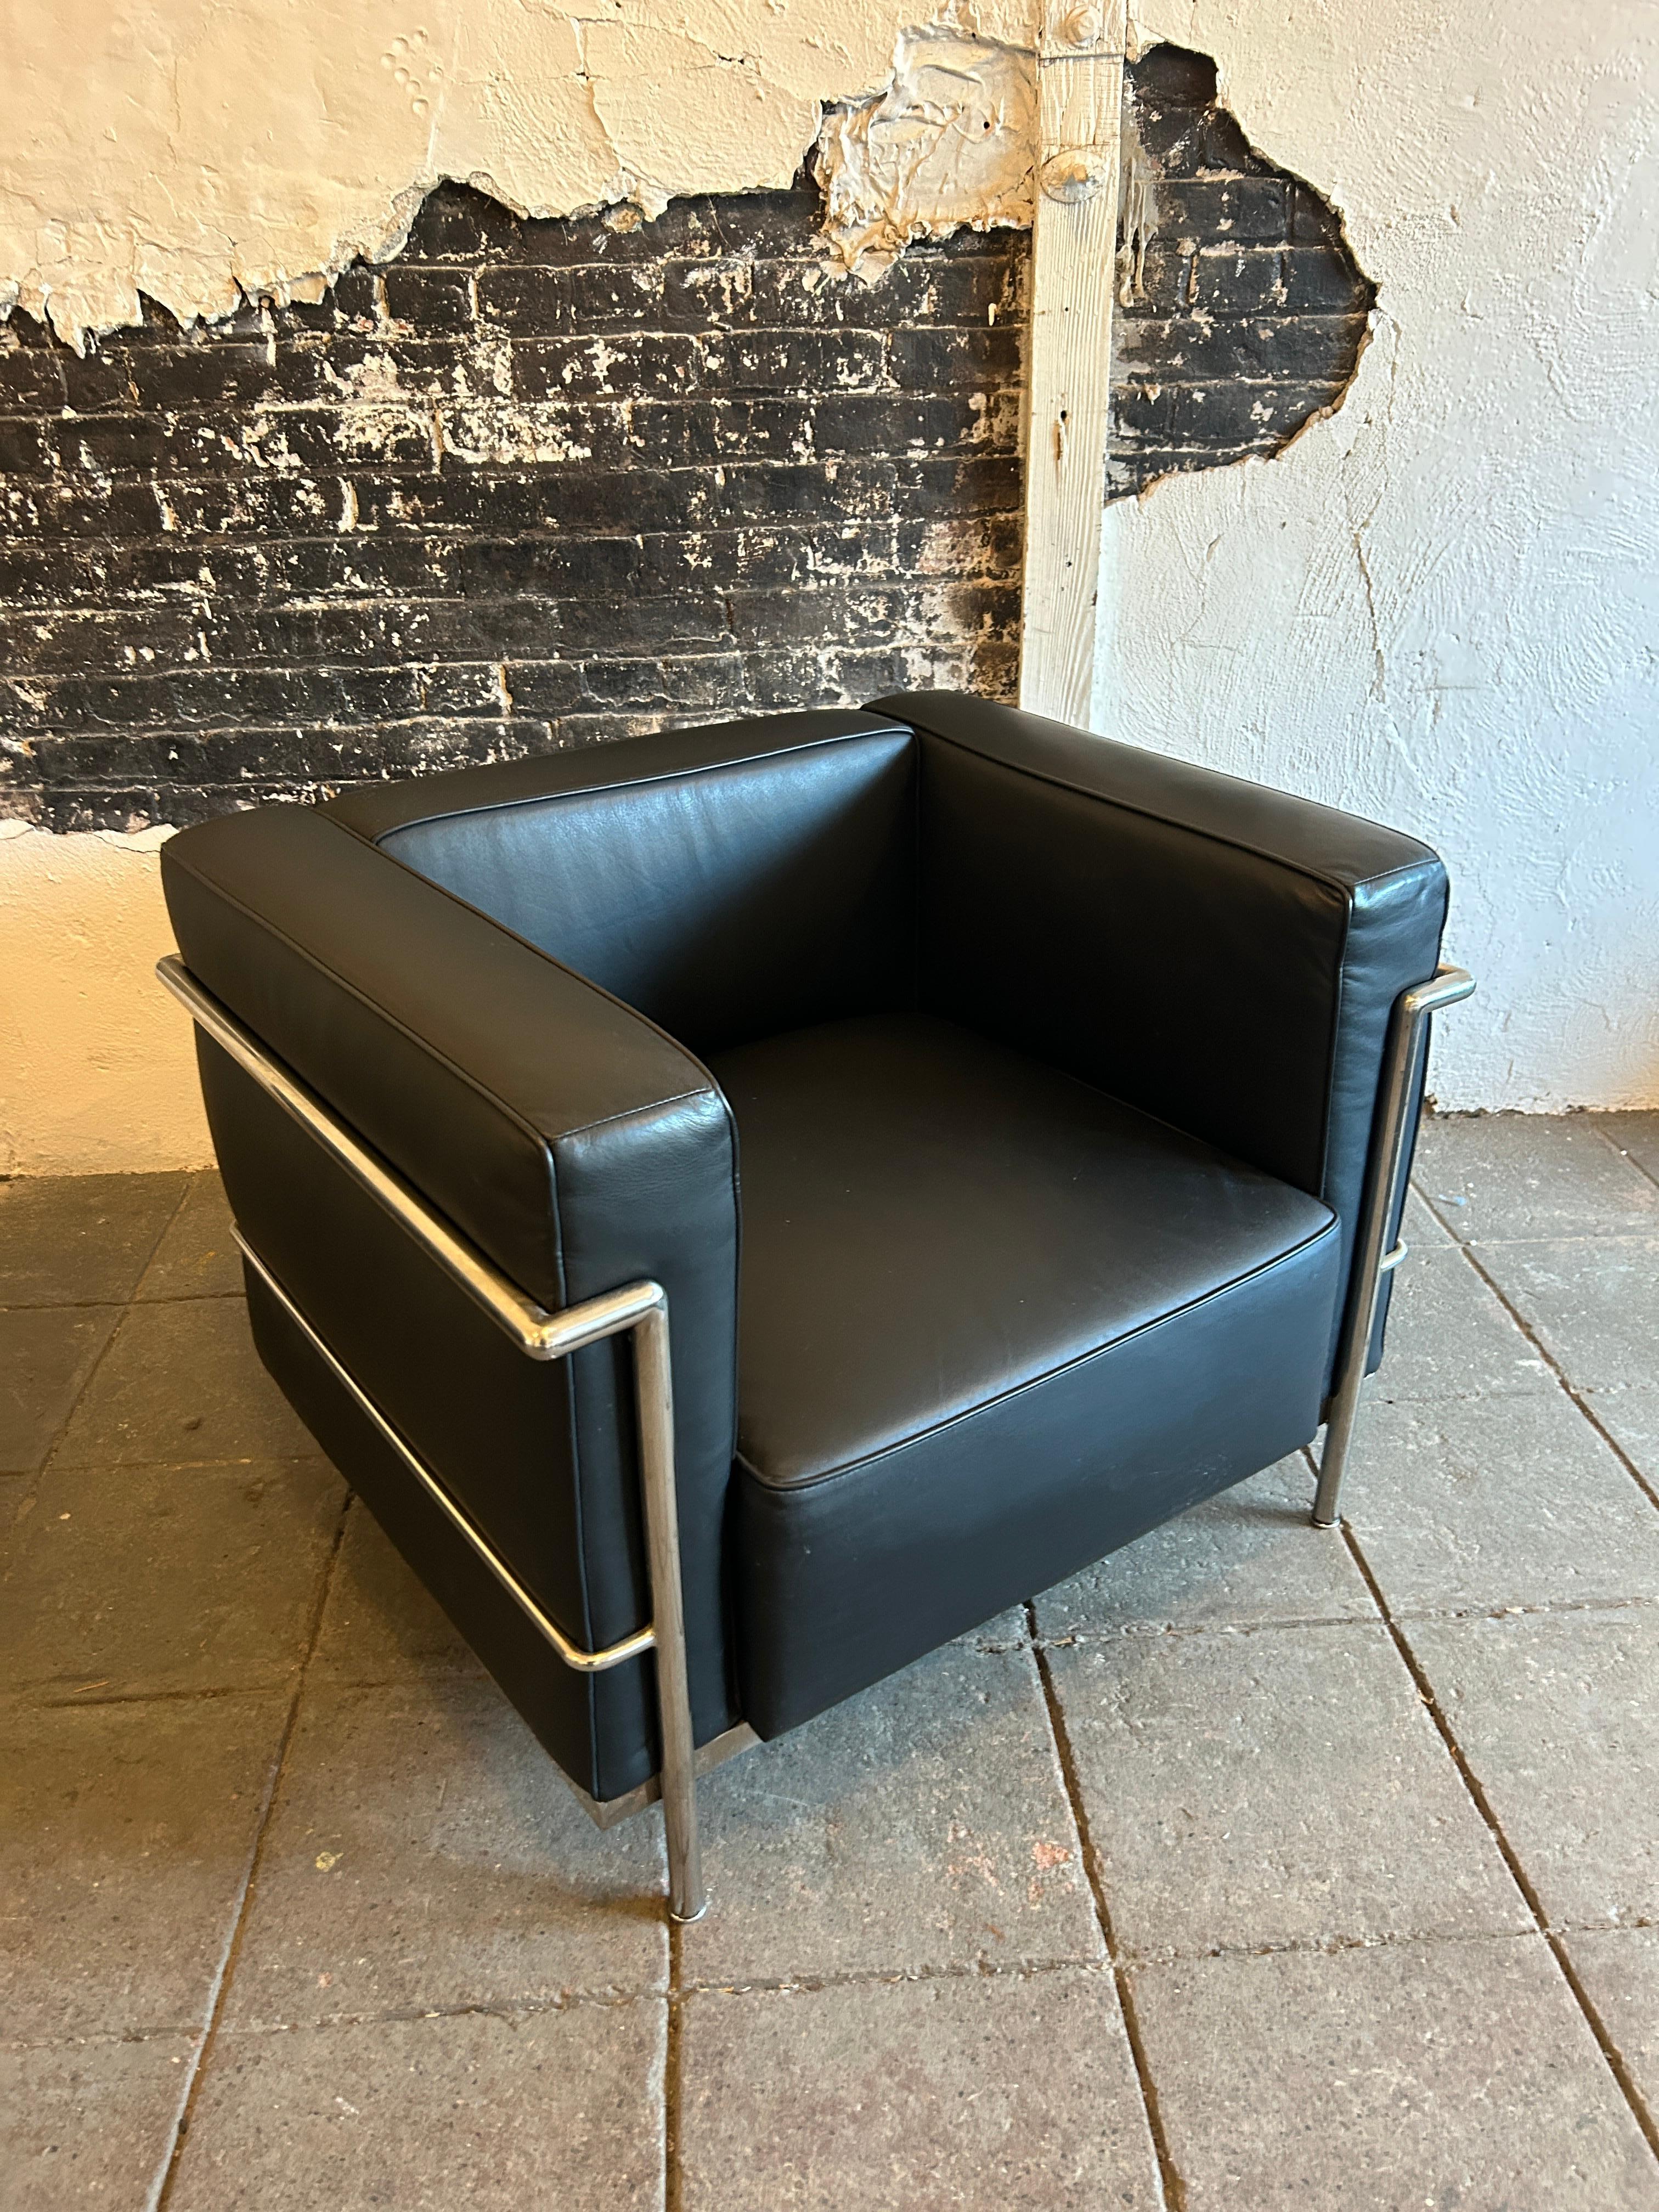 A Single pre owned modern lounge or club chair by Le Corbusier. Wide Model LC3 in soft black Leather. Triple chrome plated steel frames. Show little to no signs of use. Made in italy. Located in Brooklyn NYC.

Listing is for (1) Chair as seen in